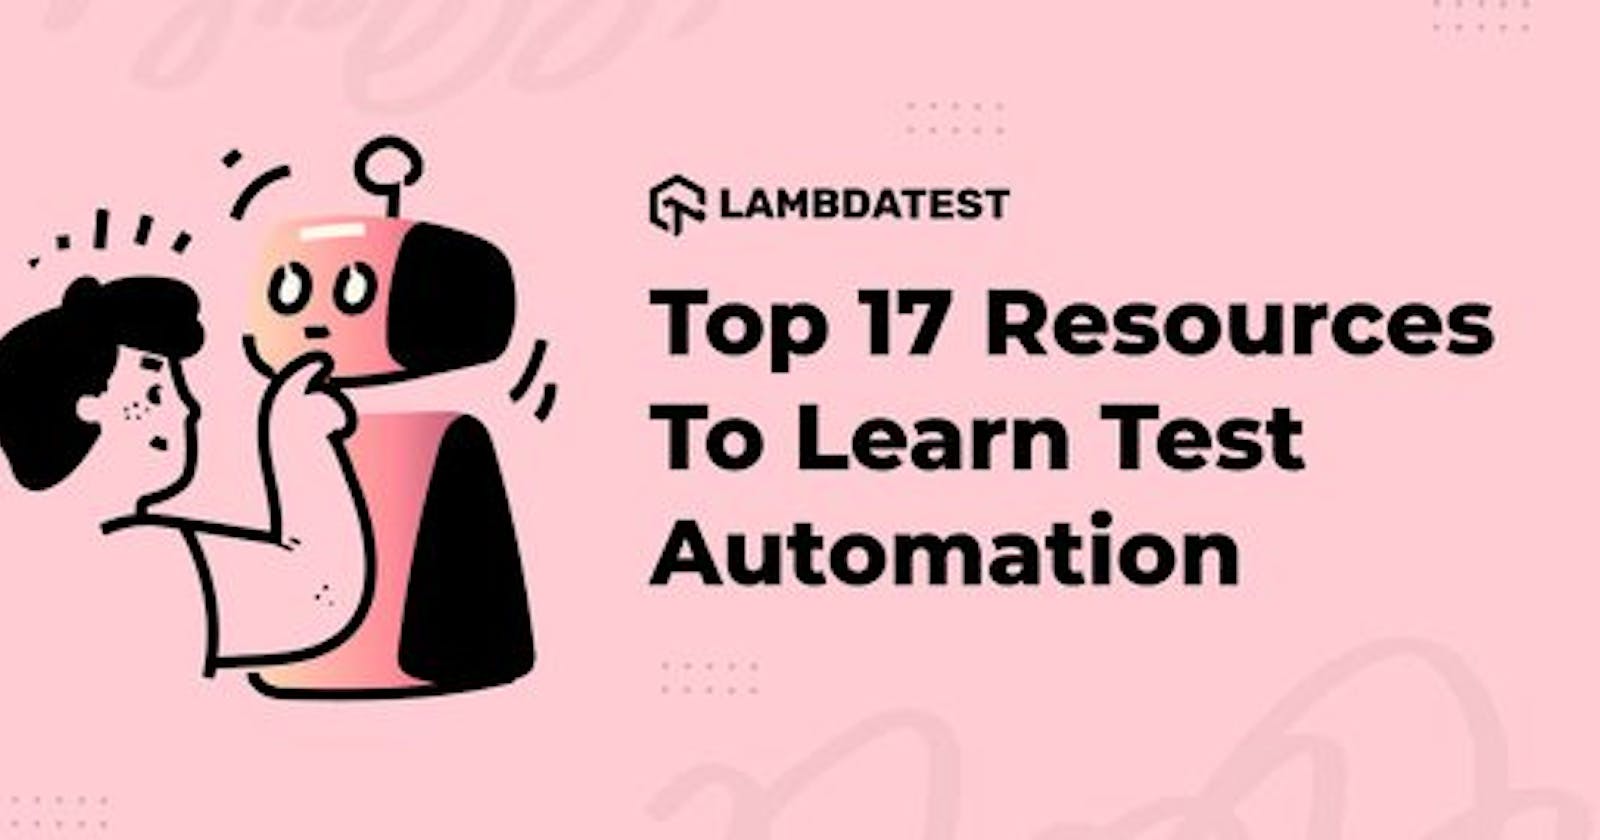 Top 17 Resources To Learn Test Automation